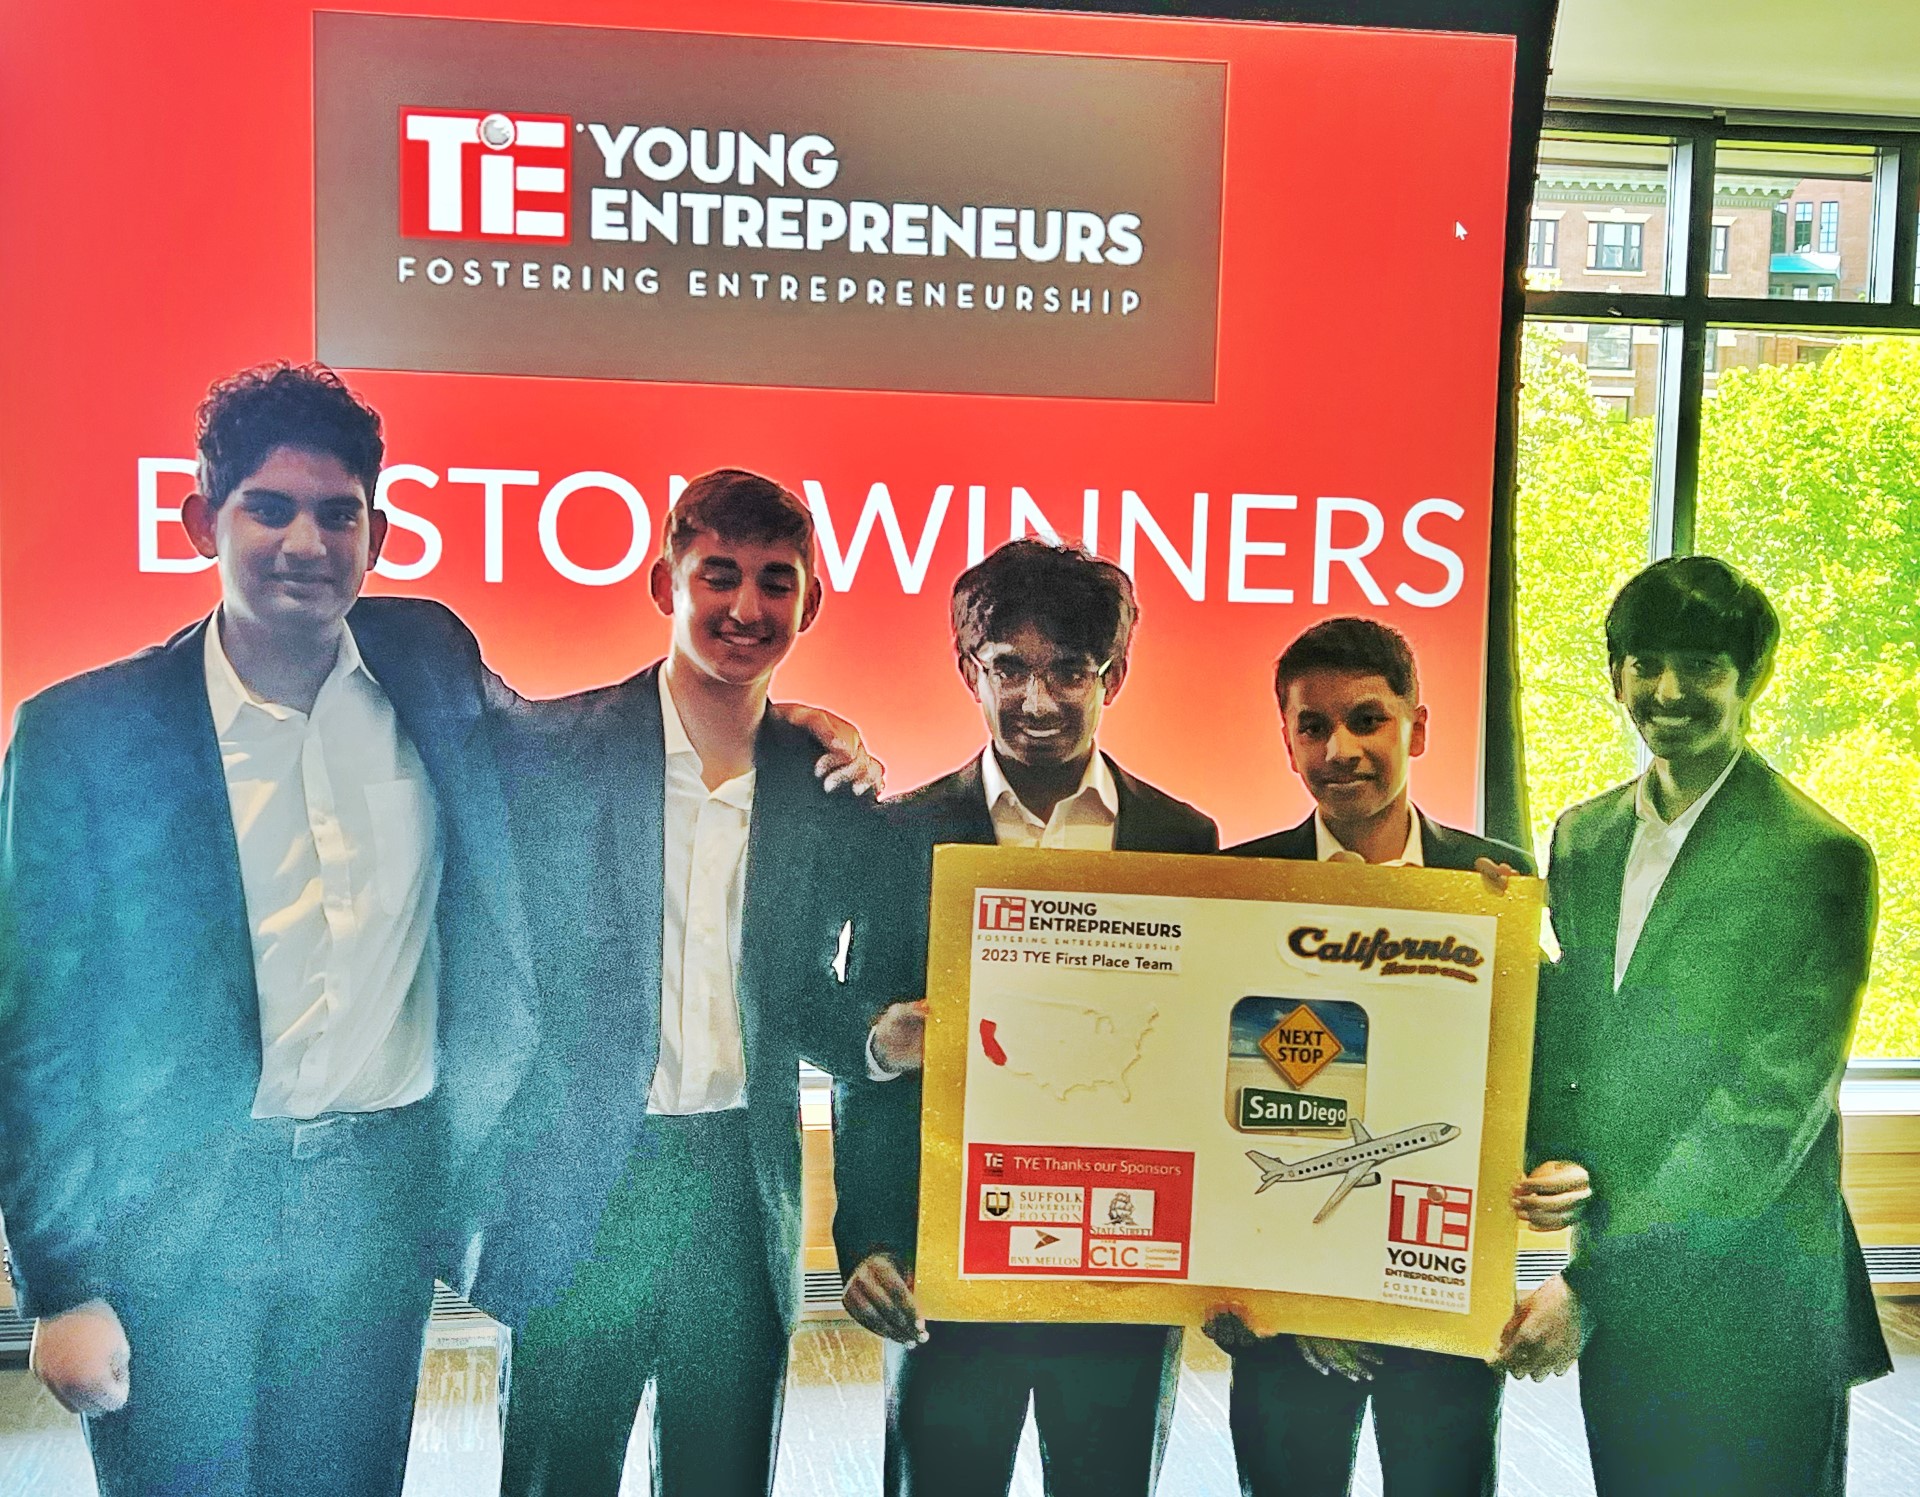 TiE Boston Announces Winners of Young Entrepreneurs Academy, AquaSol Wins First Place